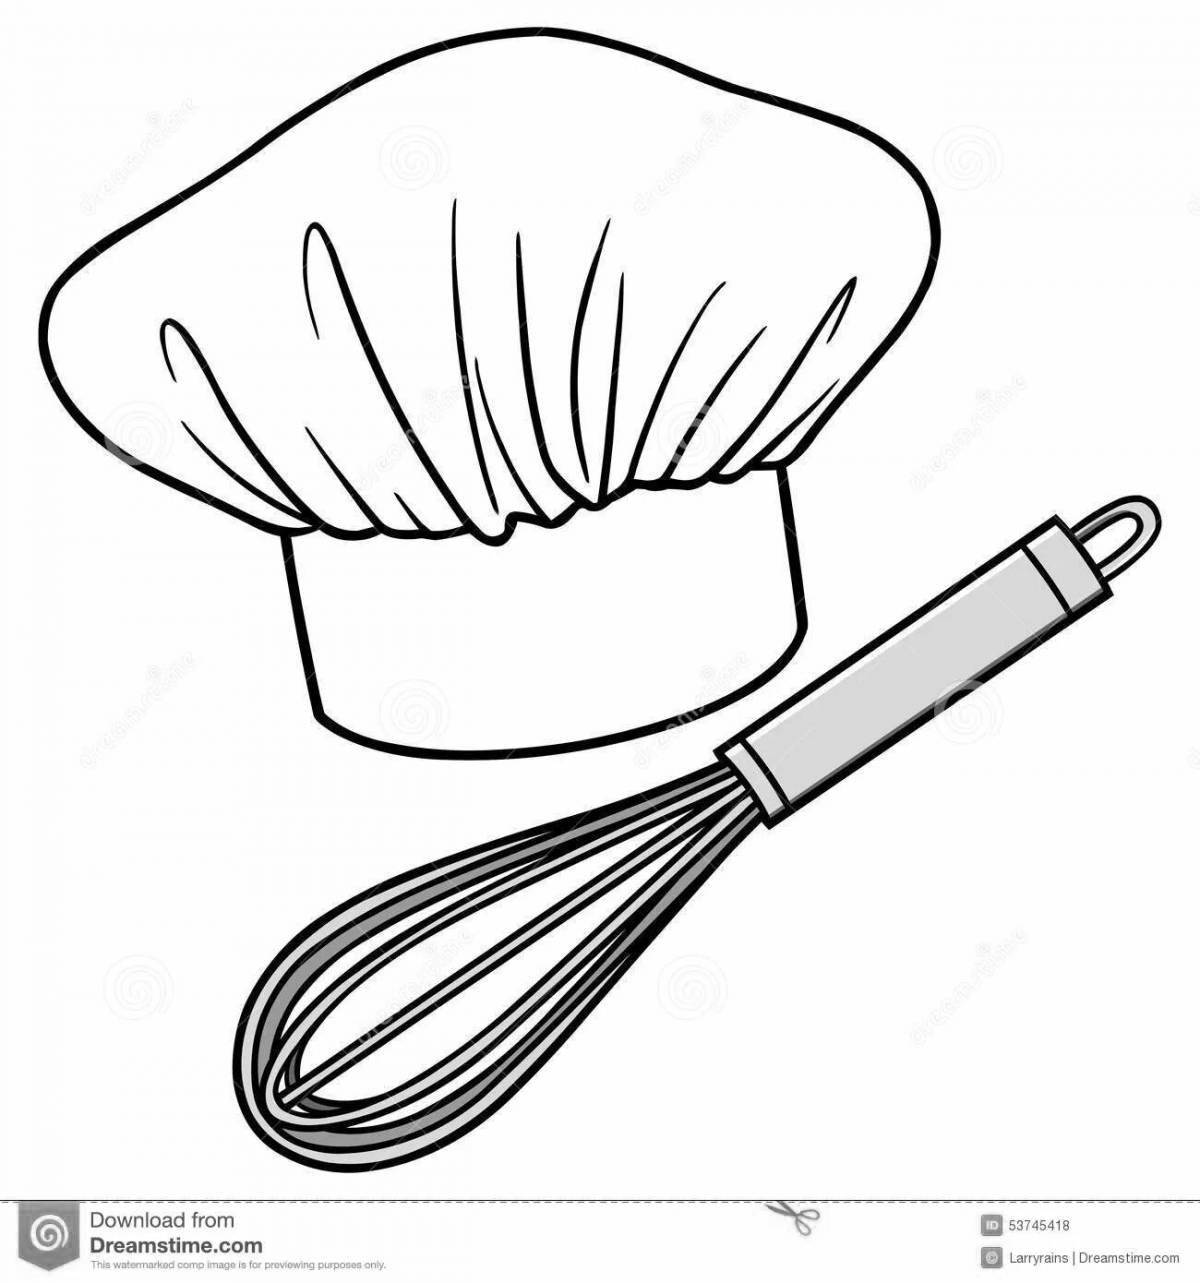 Coloring book cheerful chef's hat